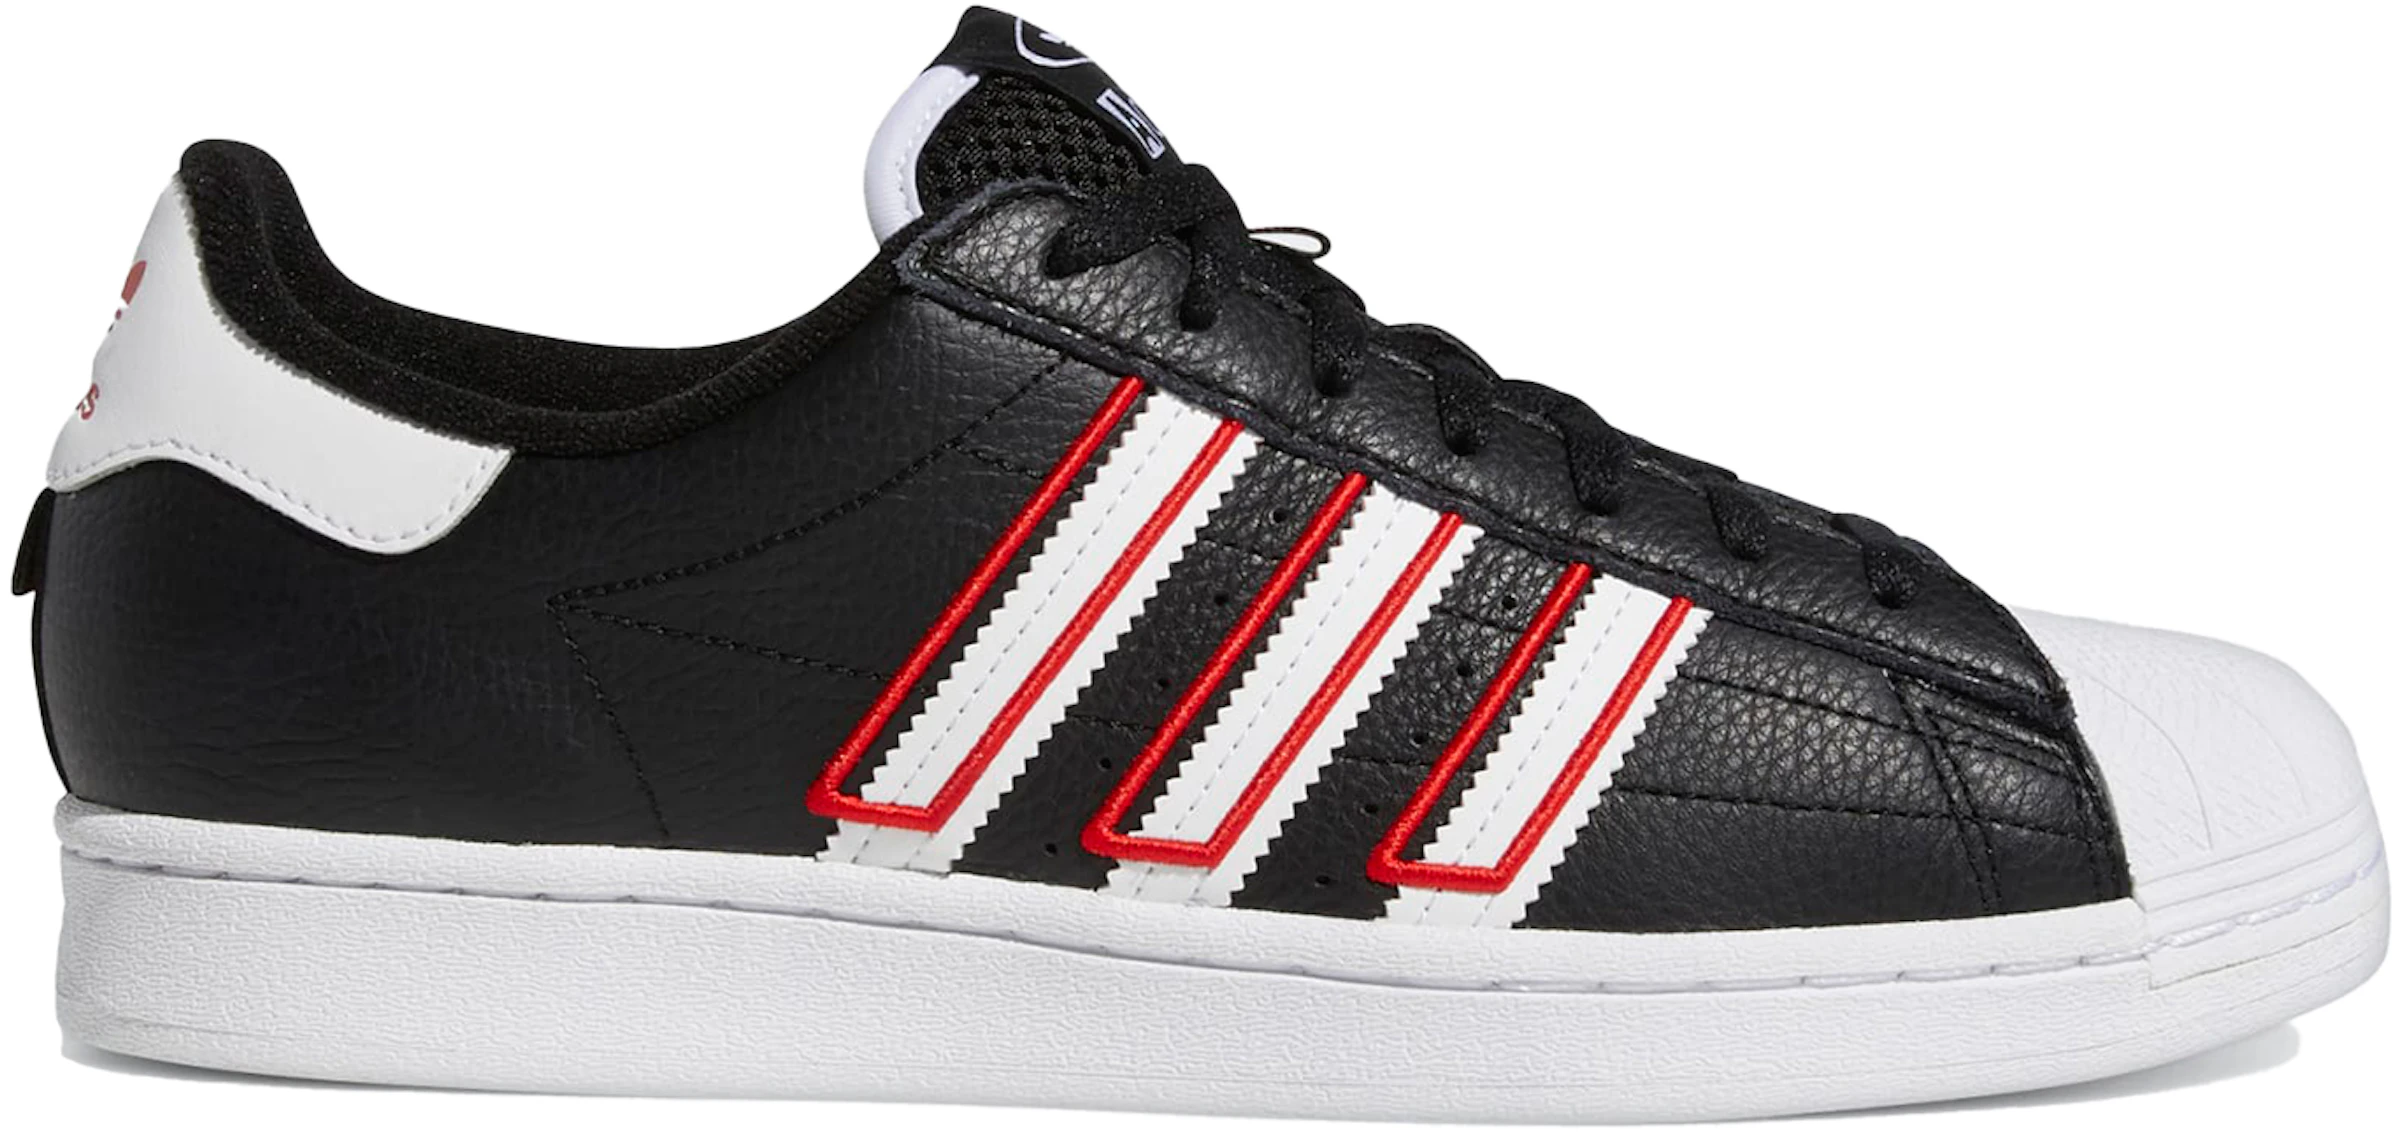 Jarra Converger Mal humor adidas Superstar Core Black Outlined White Stripes - GY0998 - ES